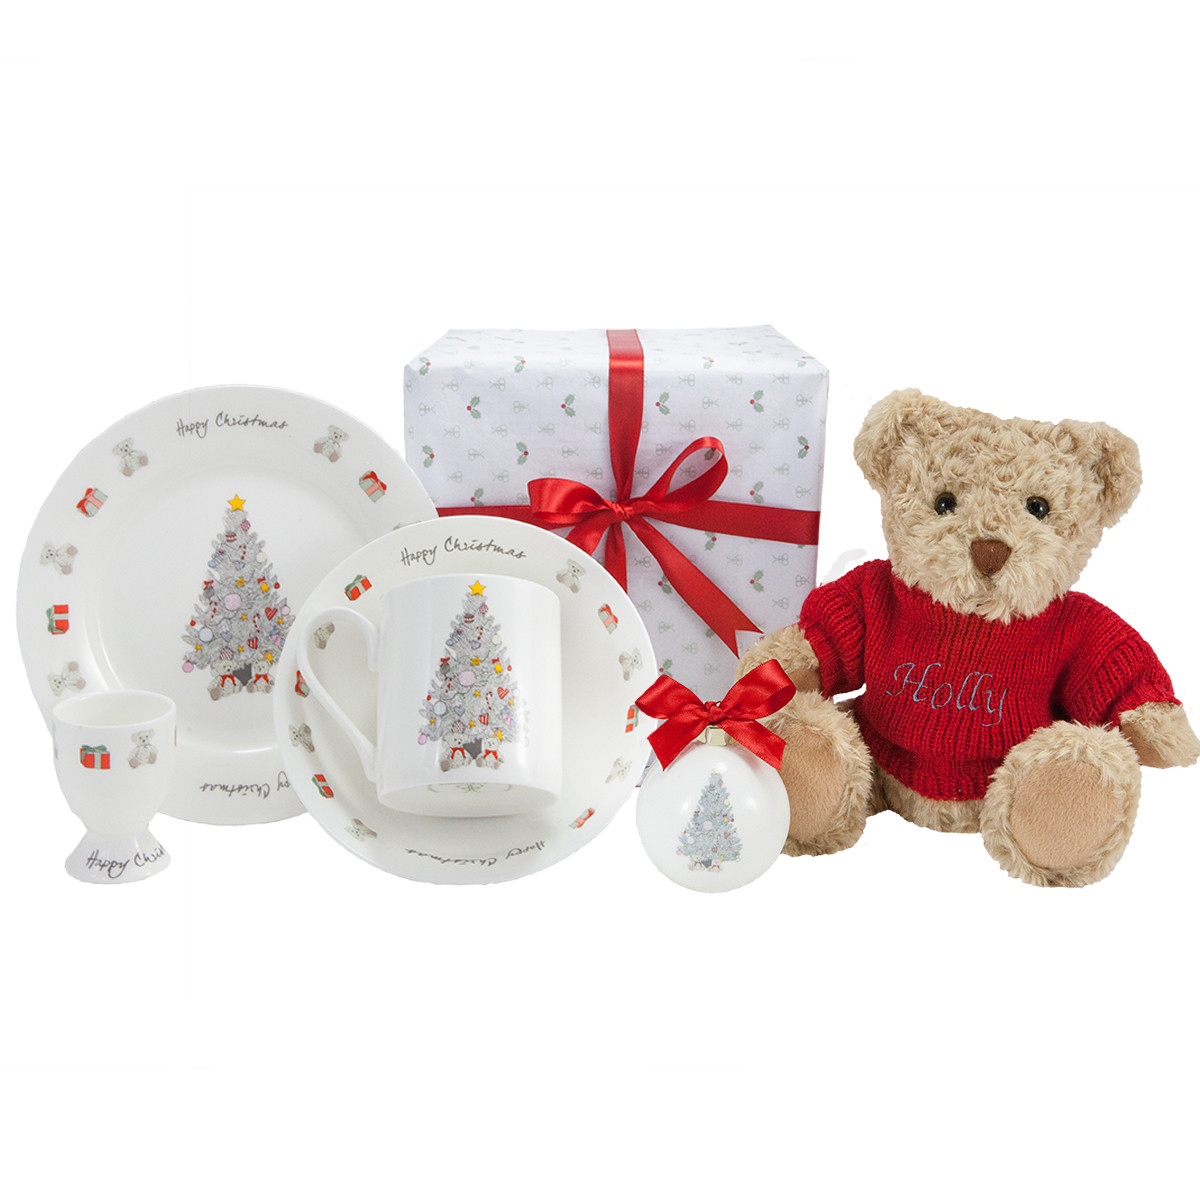 Baby 1St Christmas Gift Ideas
 The Syders Baby s First Christmas Gift Ideas